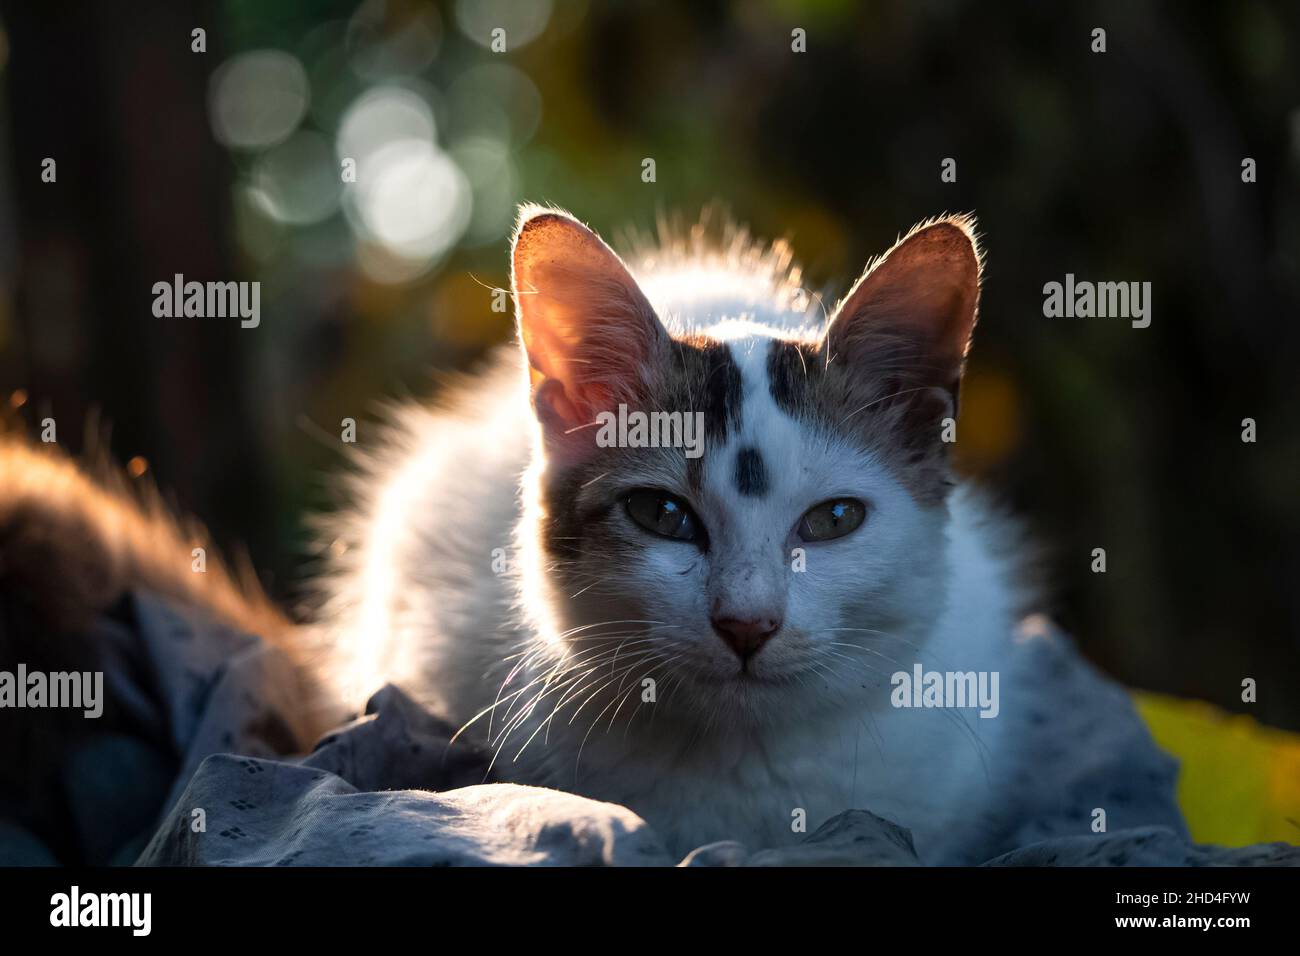 A cute baby cat face close up with beautiful lighting and blurred background Stock Photo